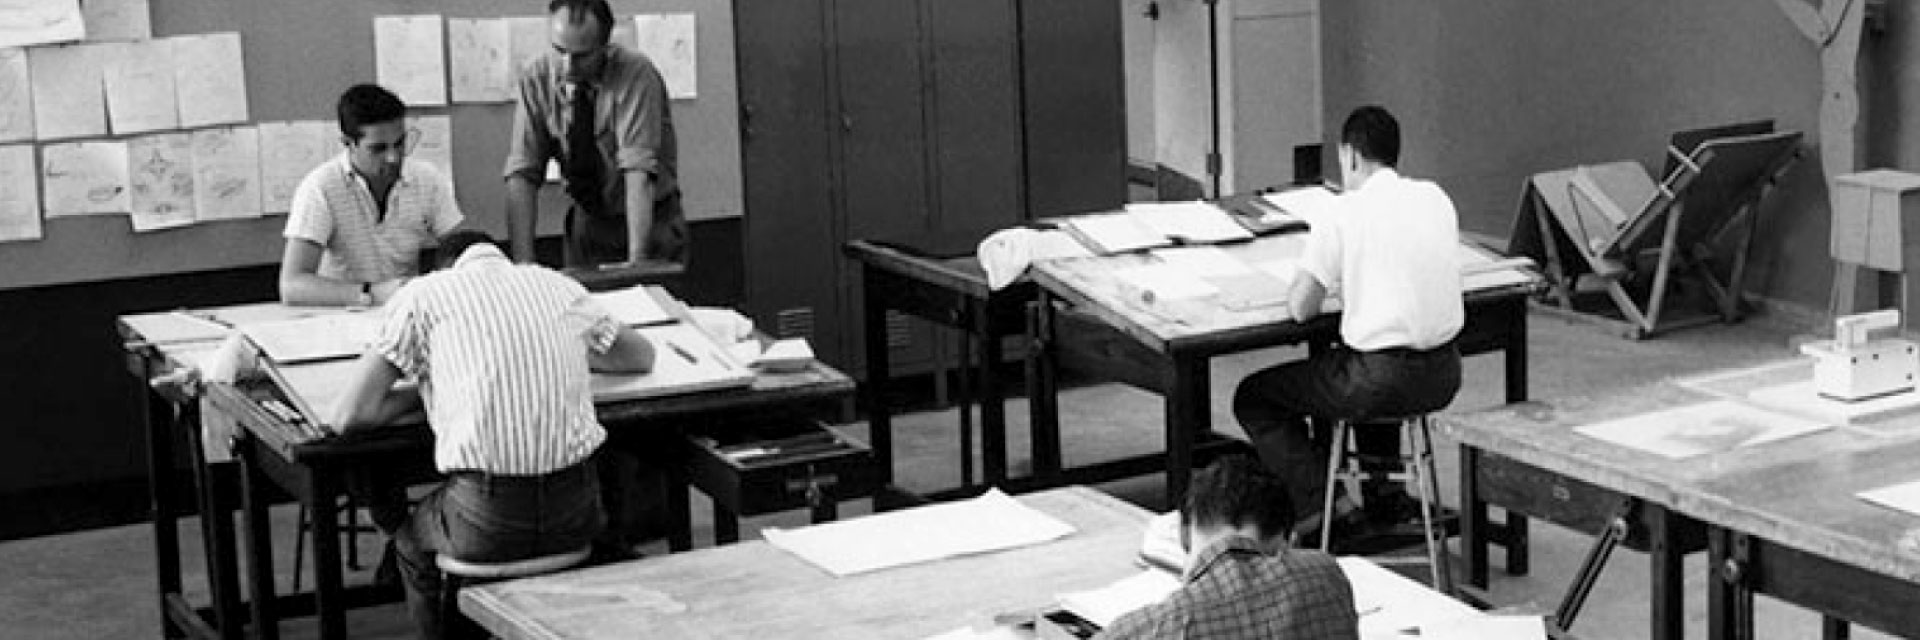 A black and white photo of students in Hin Bredendieck's class in the 1950s.